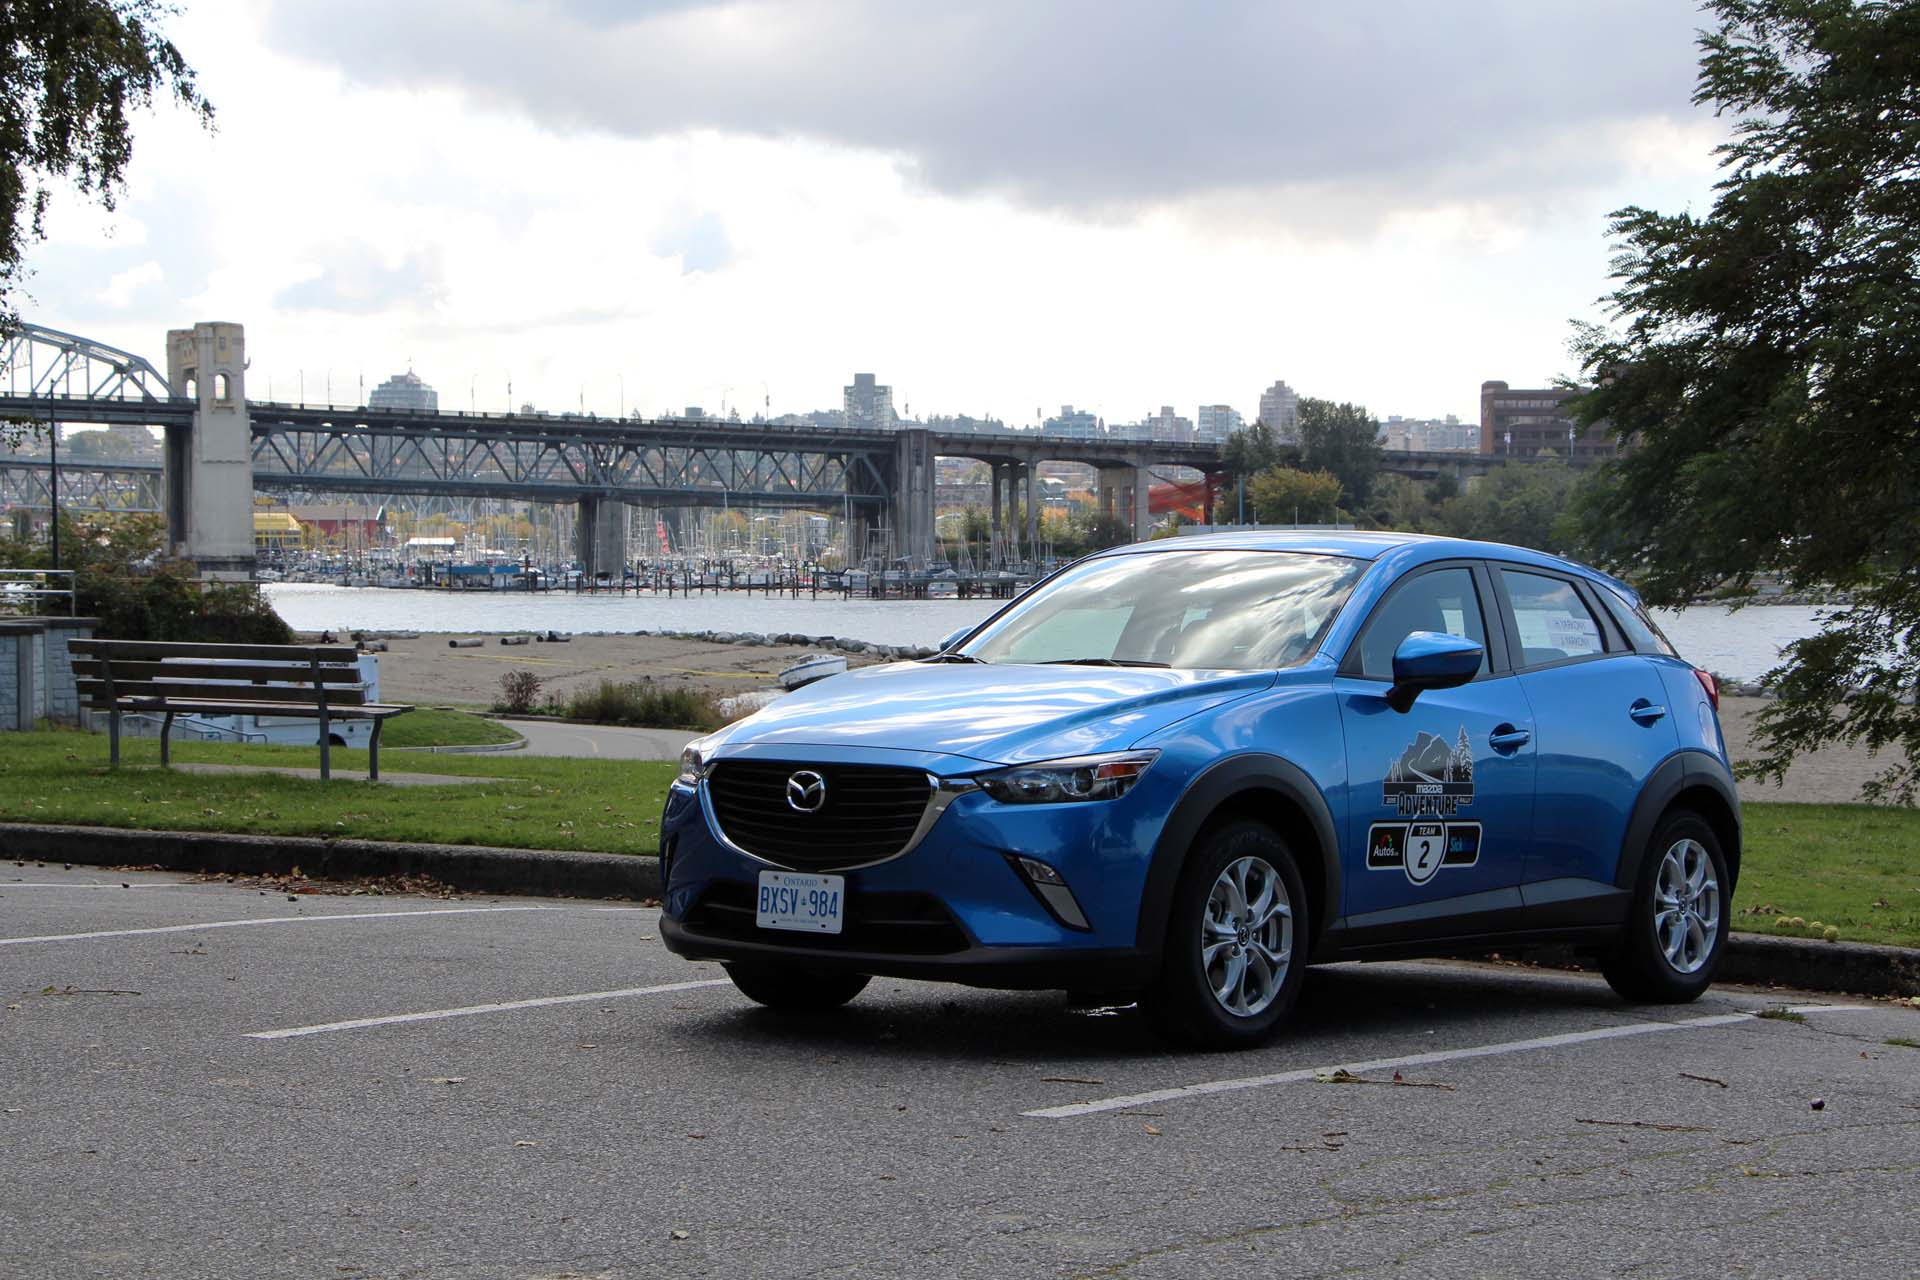 CX-3 strikes a pose with a view of the Burrard St. Bridge